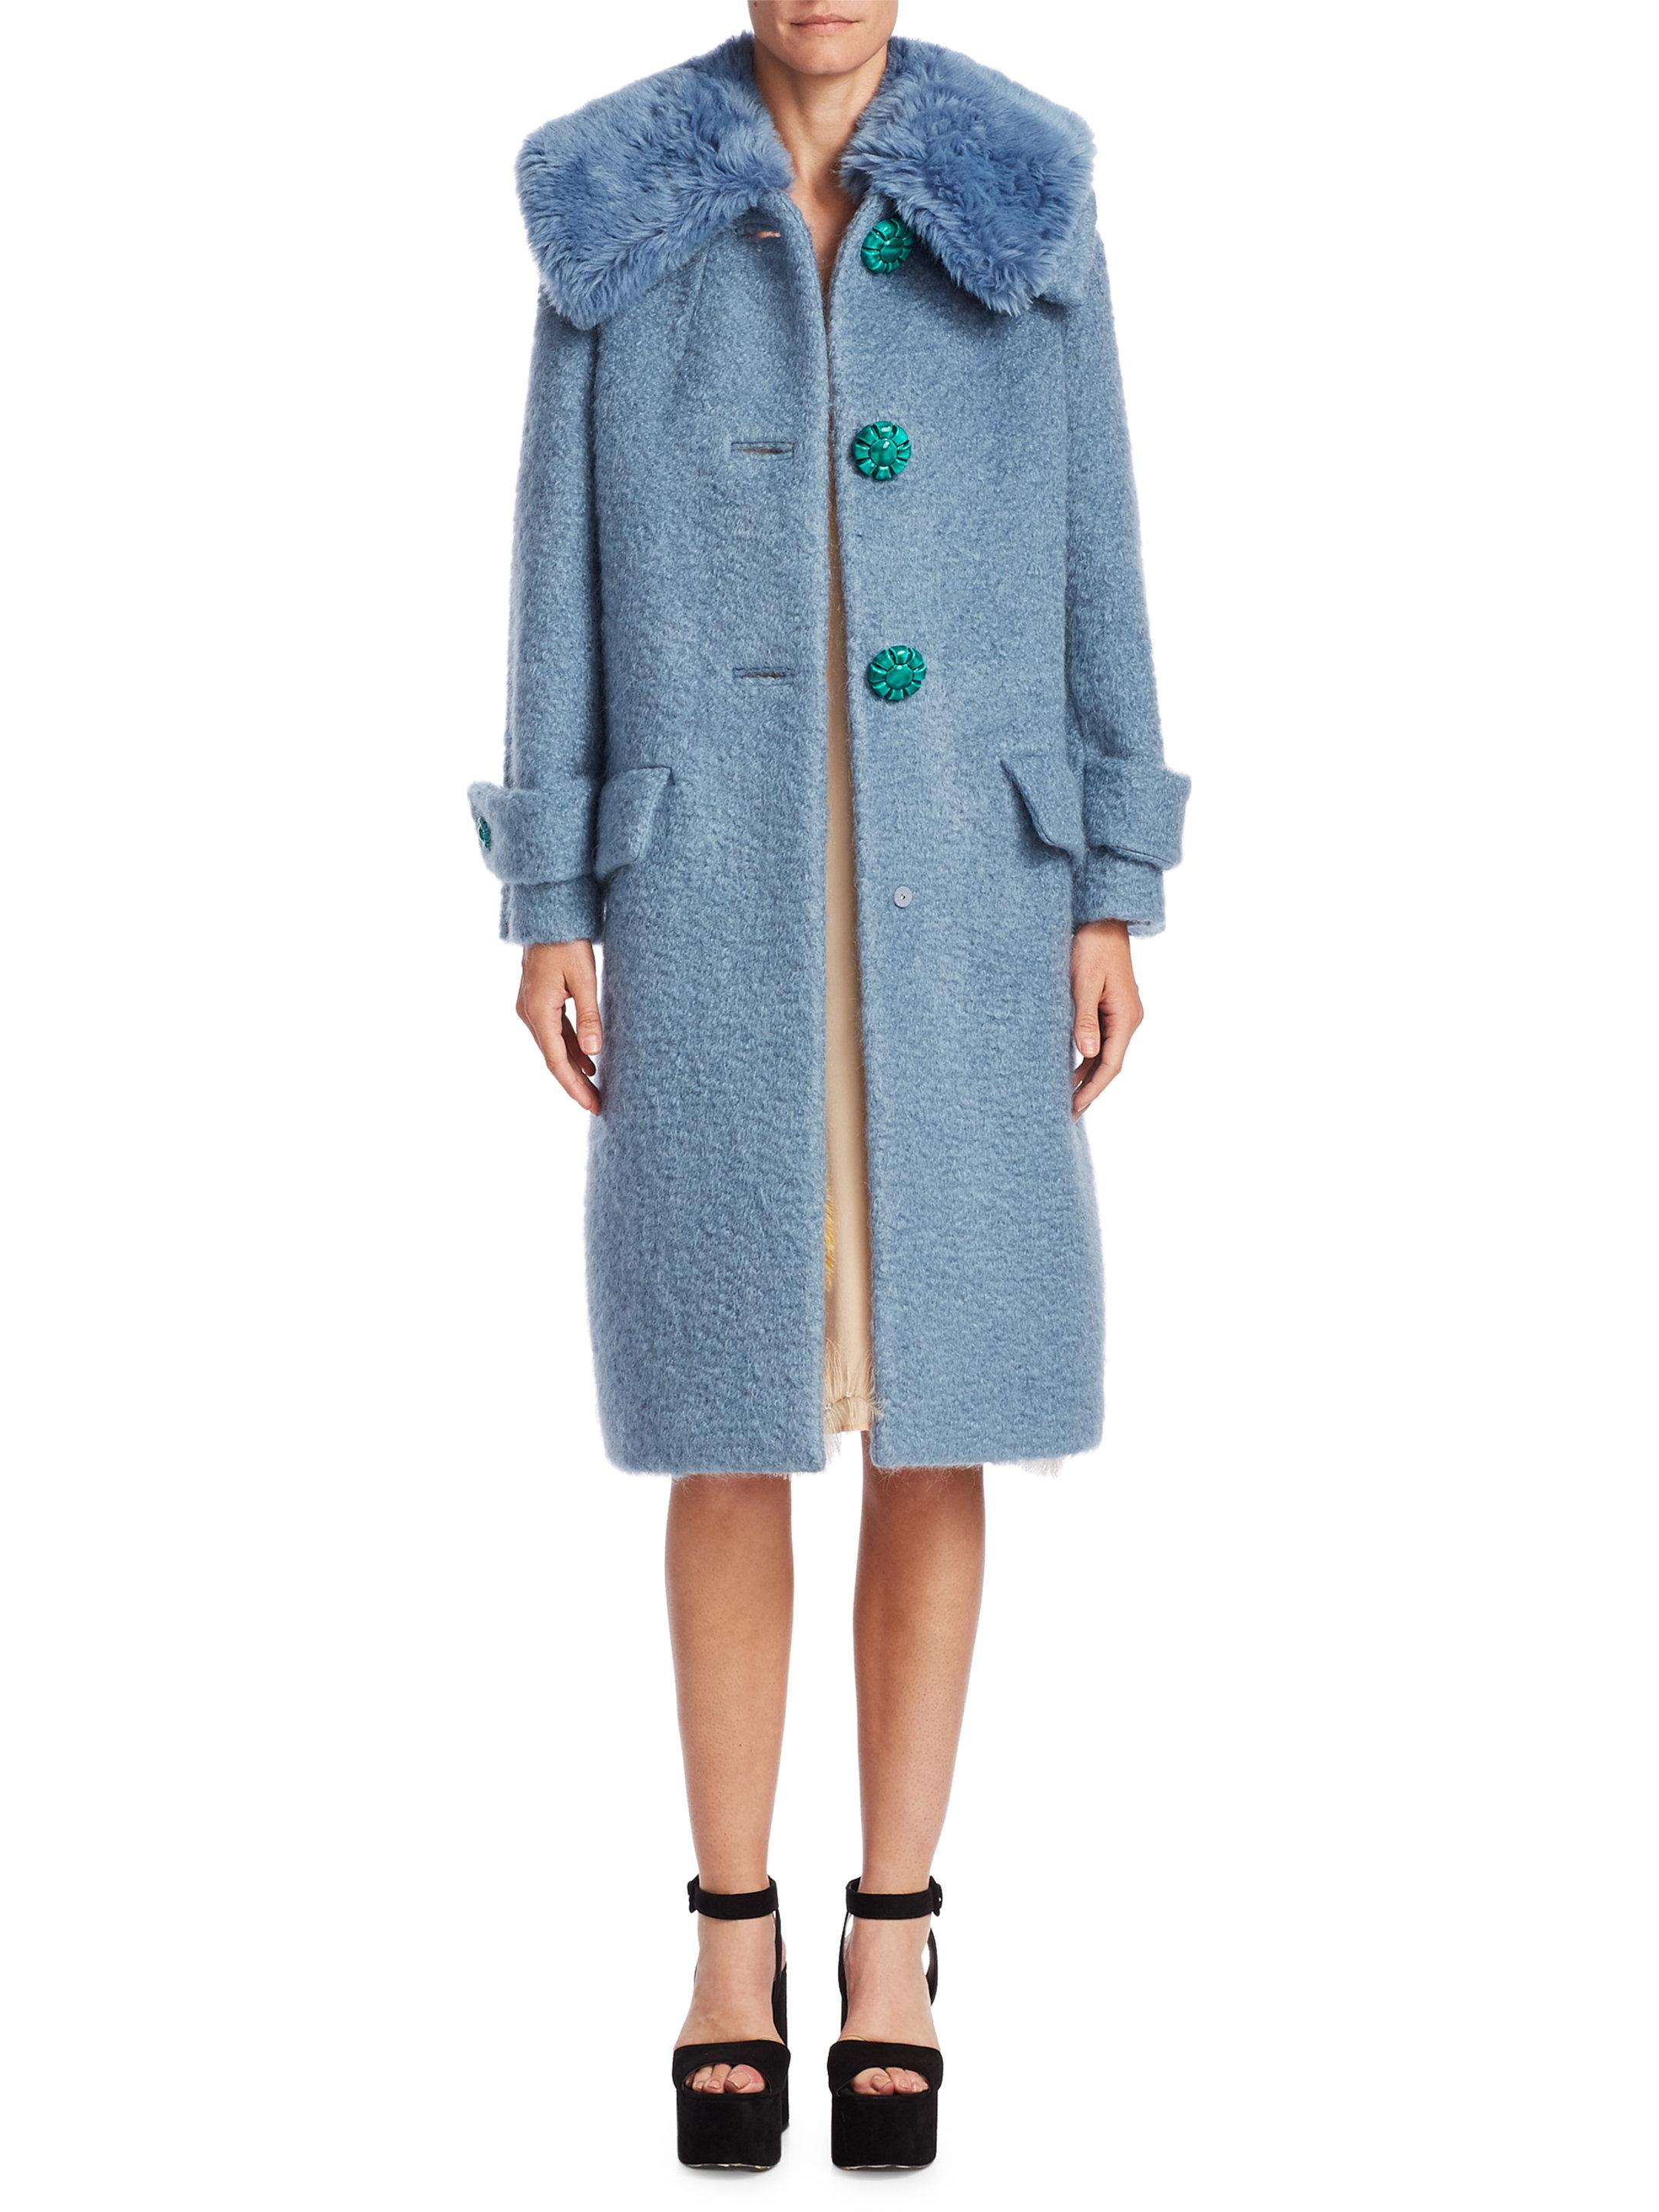 Miu Miu Felted Boucle Coat With Faux Fur Collar in Blue | Lyst